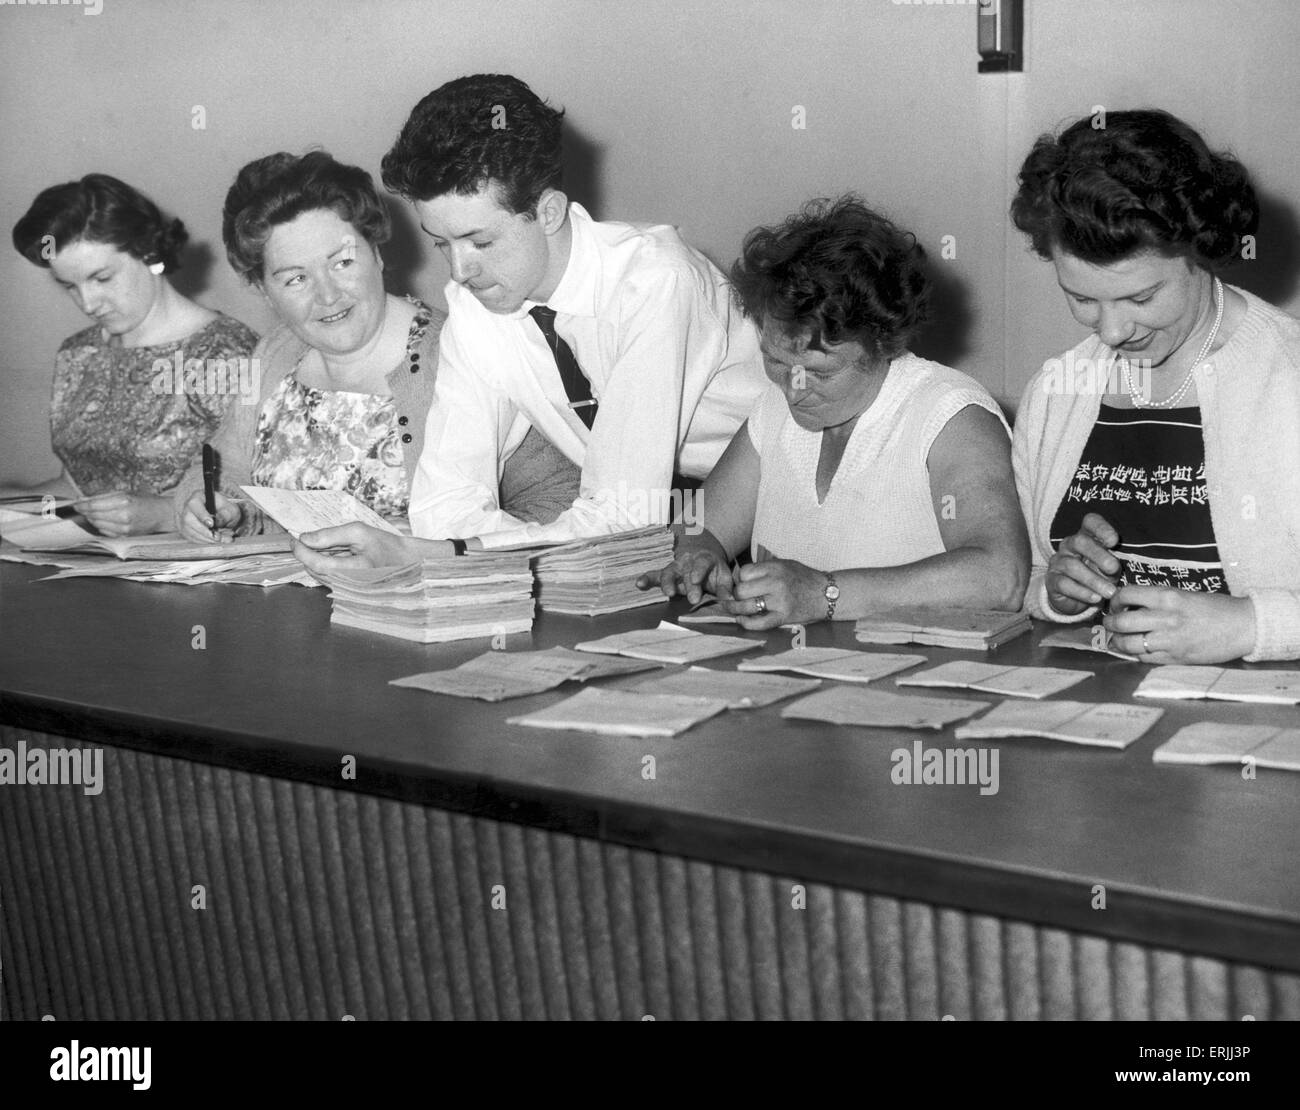 Australian cricket tour of England for the Ashes. England v Australia First Test match at Edgbaston. L-R: Ann Kerr, Mary Williams, Tony Haycock, Mrs Norah Deakins and Pat Craig at work on the ticket rush for the test. 6th June 1961. Stock Photo